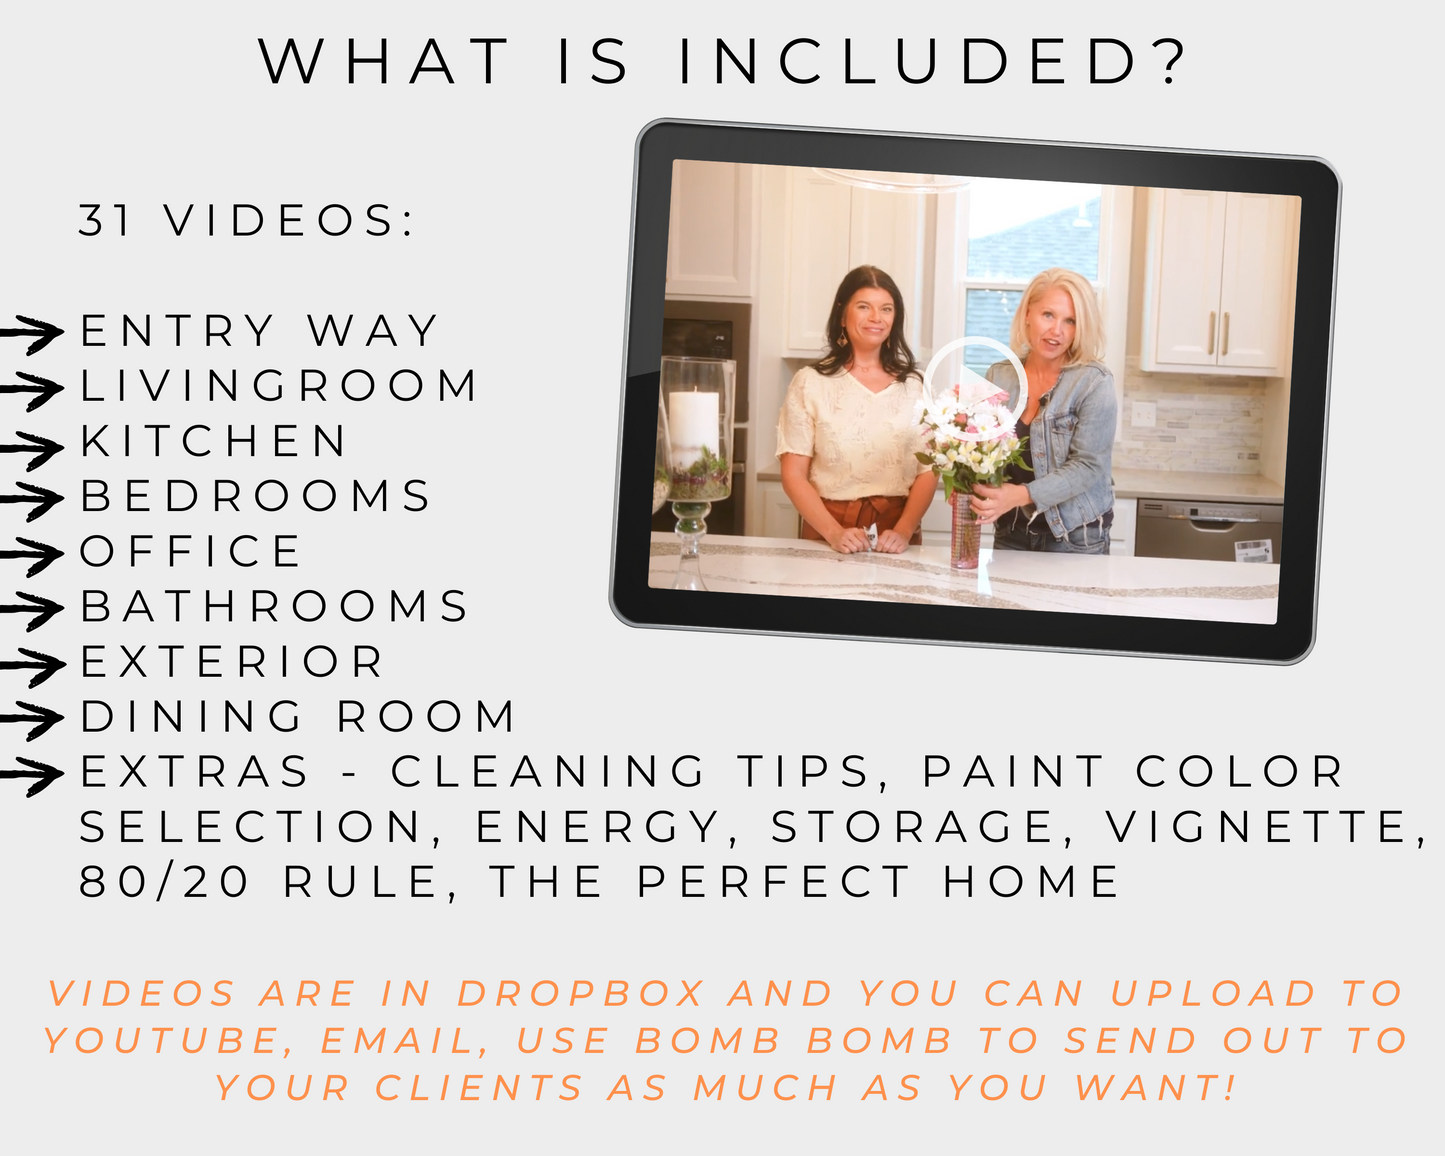 Real Estate Staging Videos